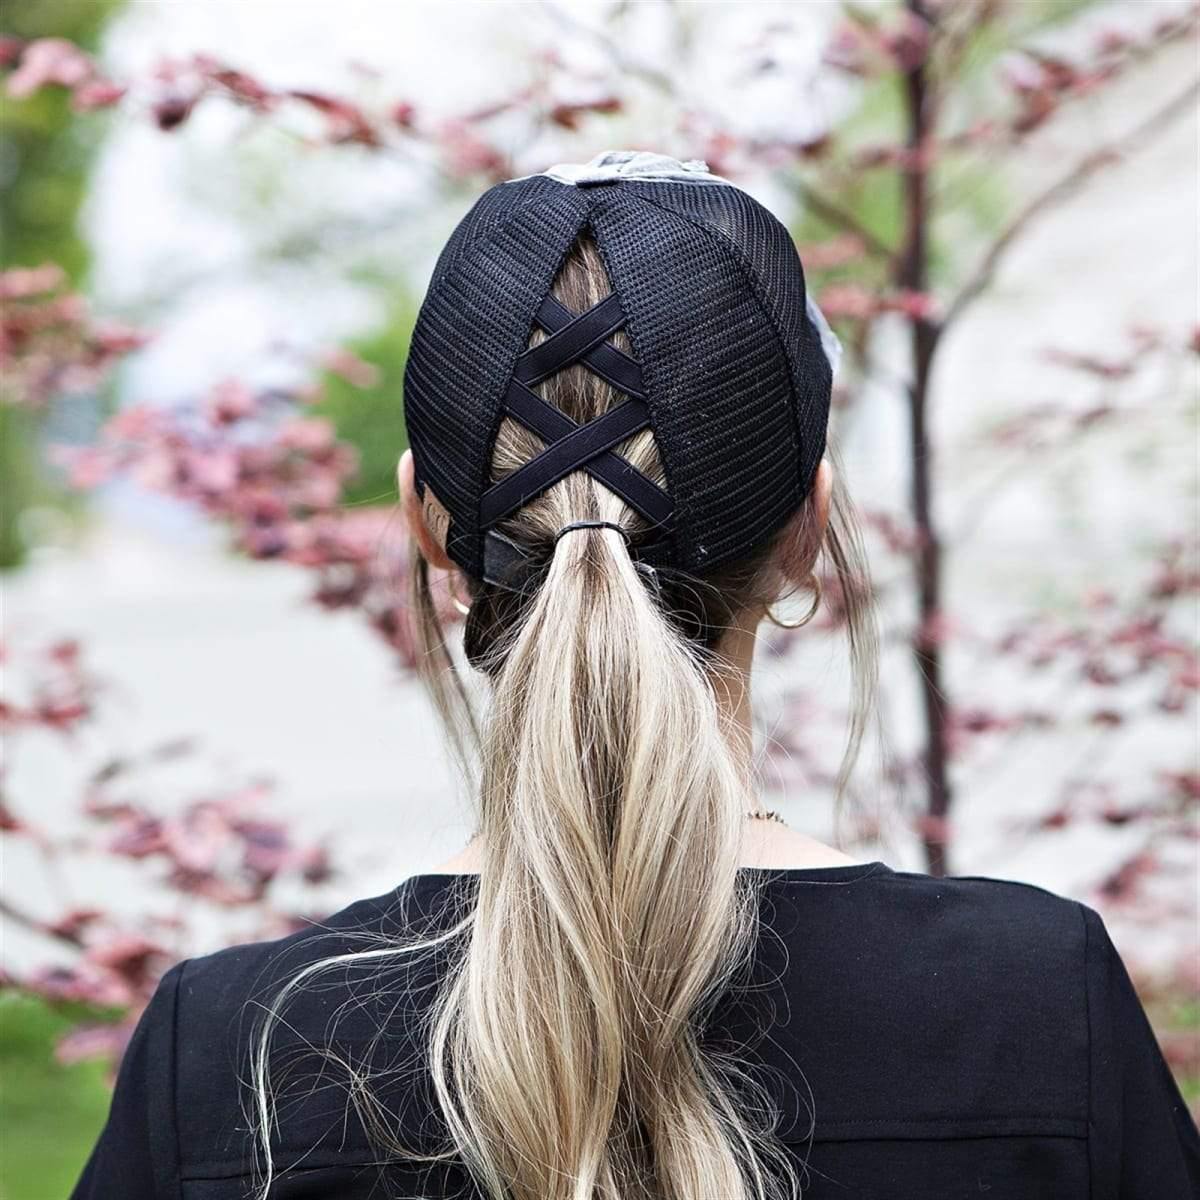 Take A Hike Criss Cross Ponytail Hat - OwlBehave 